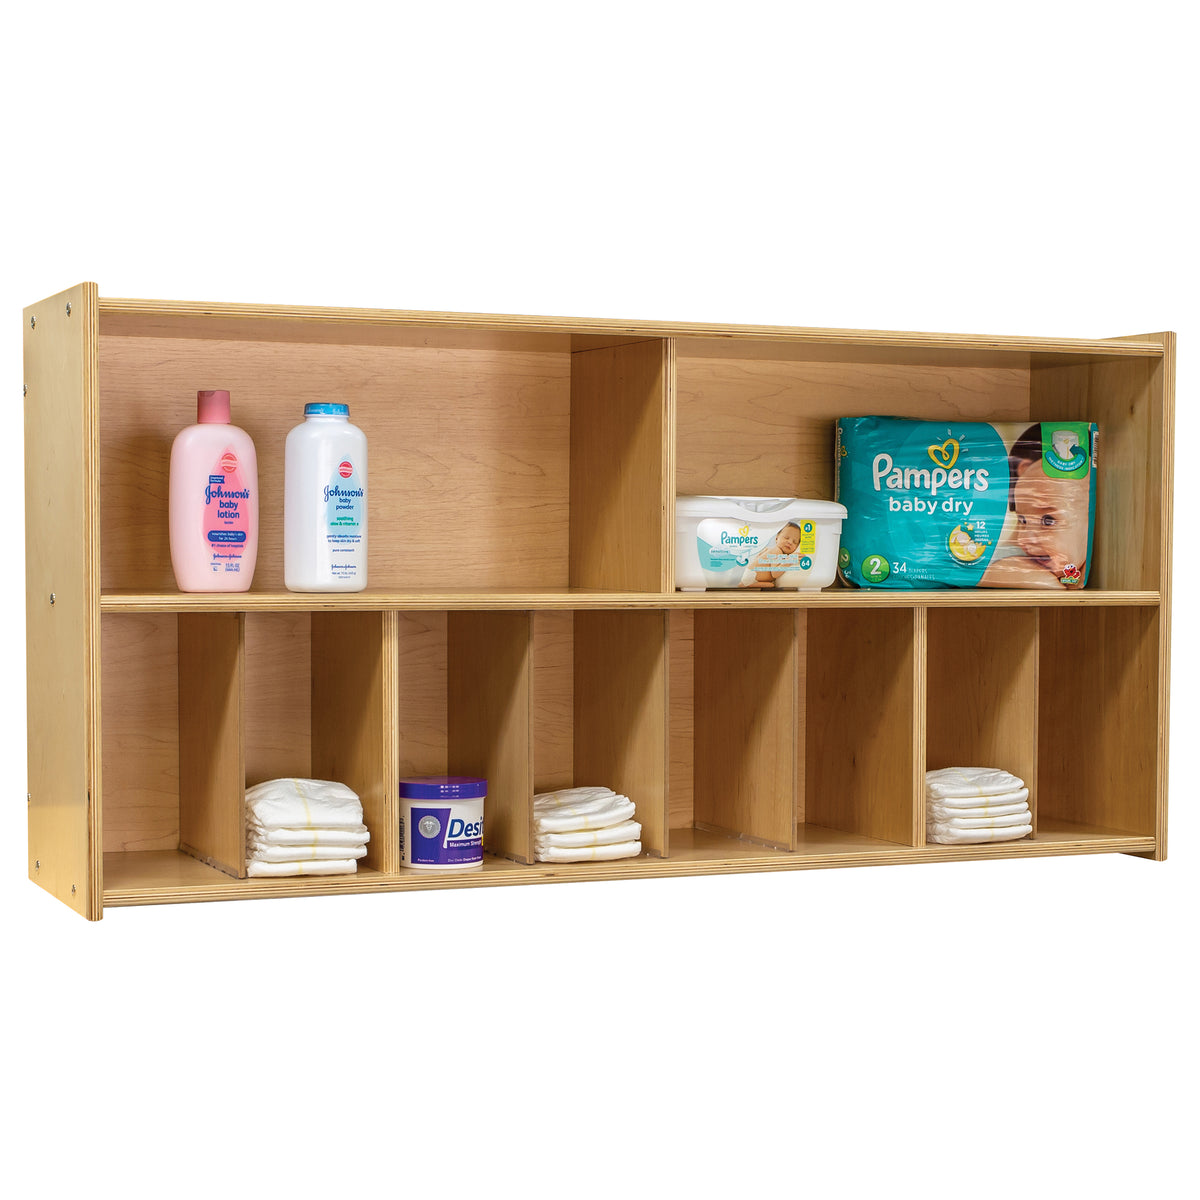 Plywood Diaper Wall Storage With Two Upper Compartments and Three Removable Dividers forming Eight Lower Cubbies.